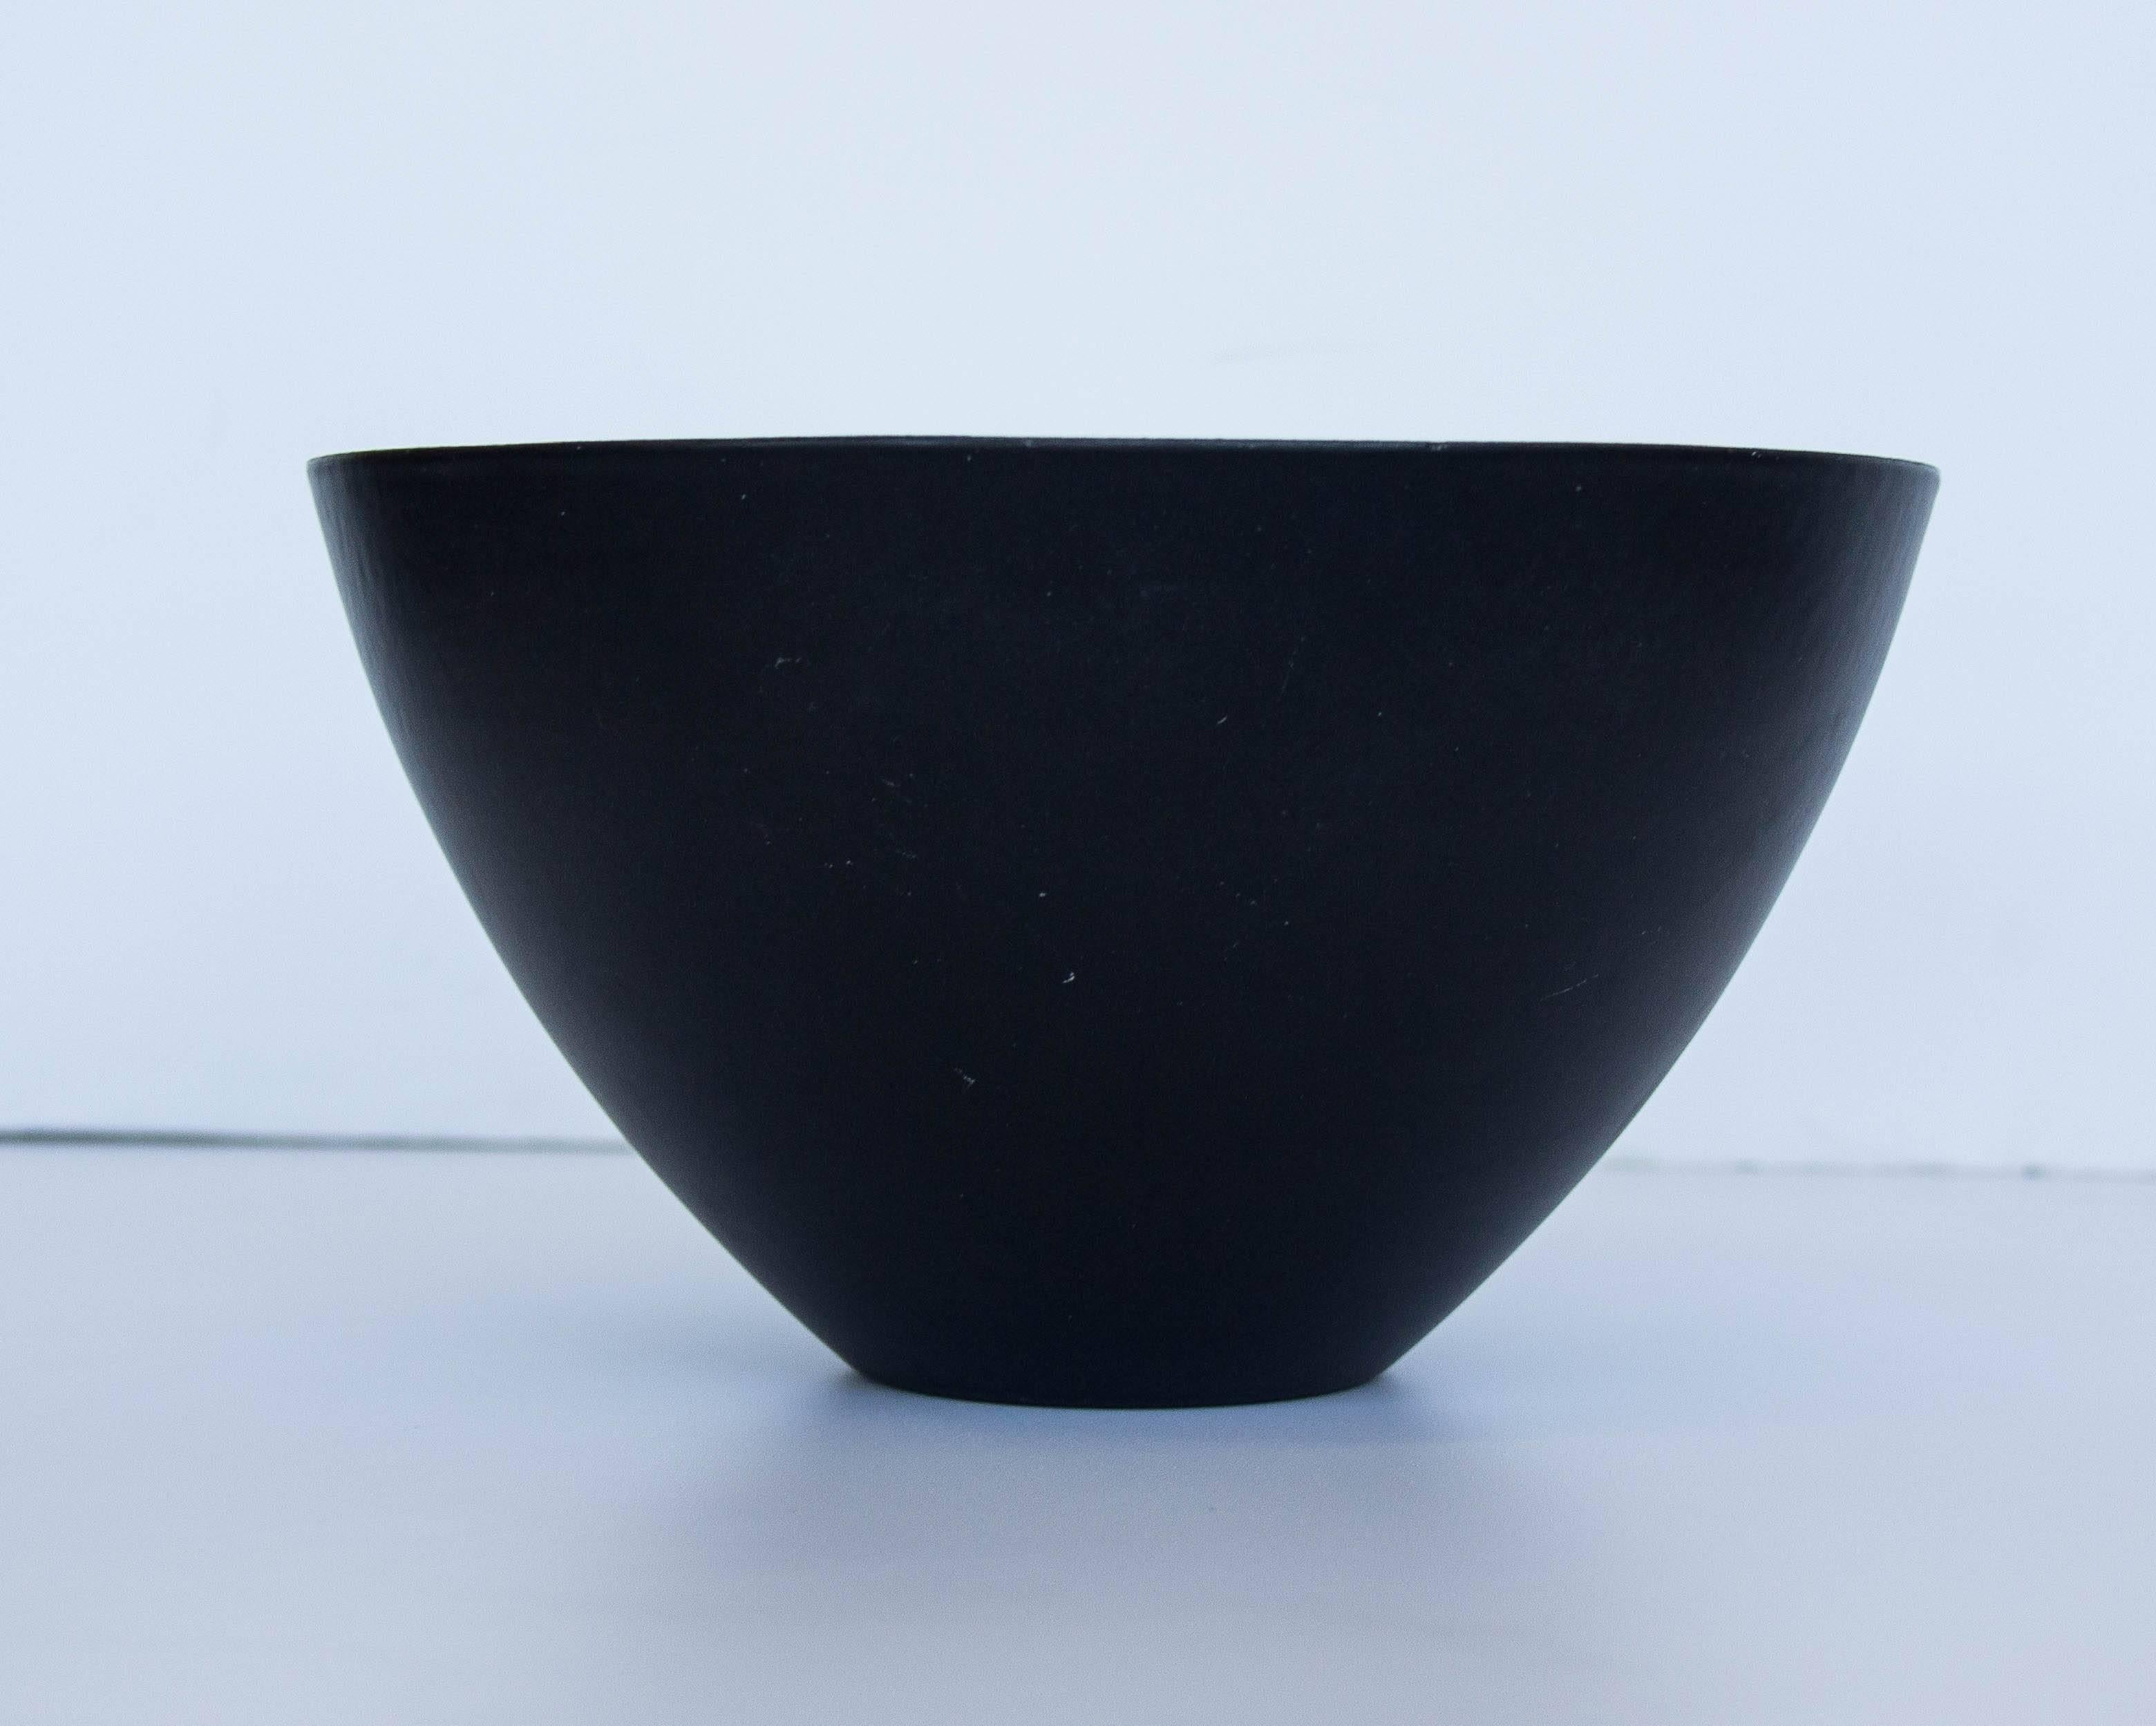 An original Krenit bowl designed by Herbert Krenchel in 1954. The prize-winning design has a distinctively thin edge highlighting the smooth exterior of the bowl and its bright, enameled interior.

Condition: Good vintage condition.